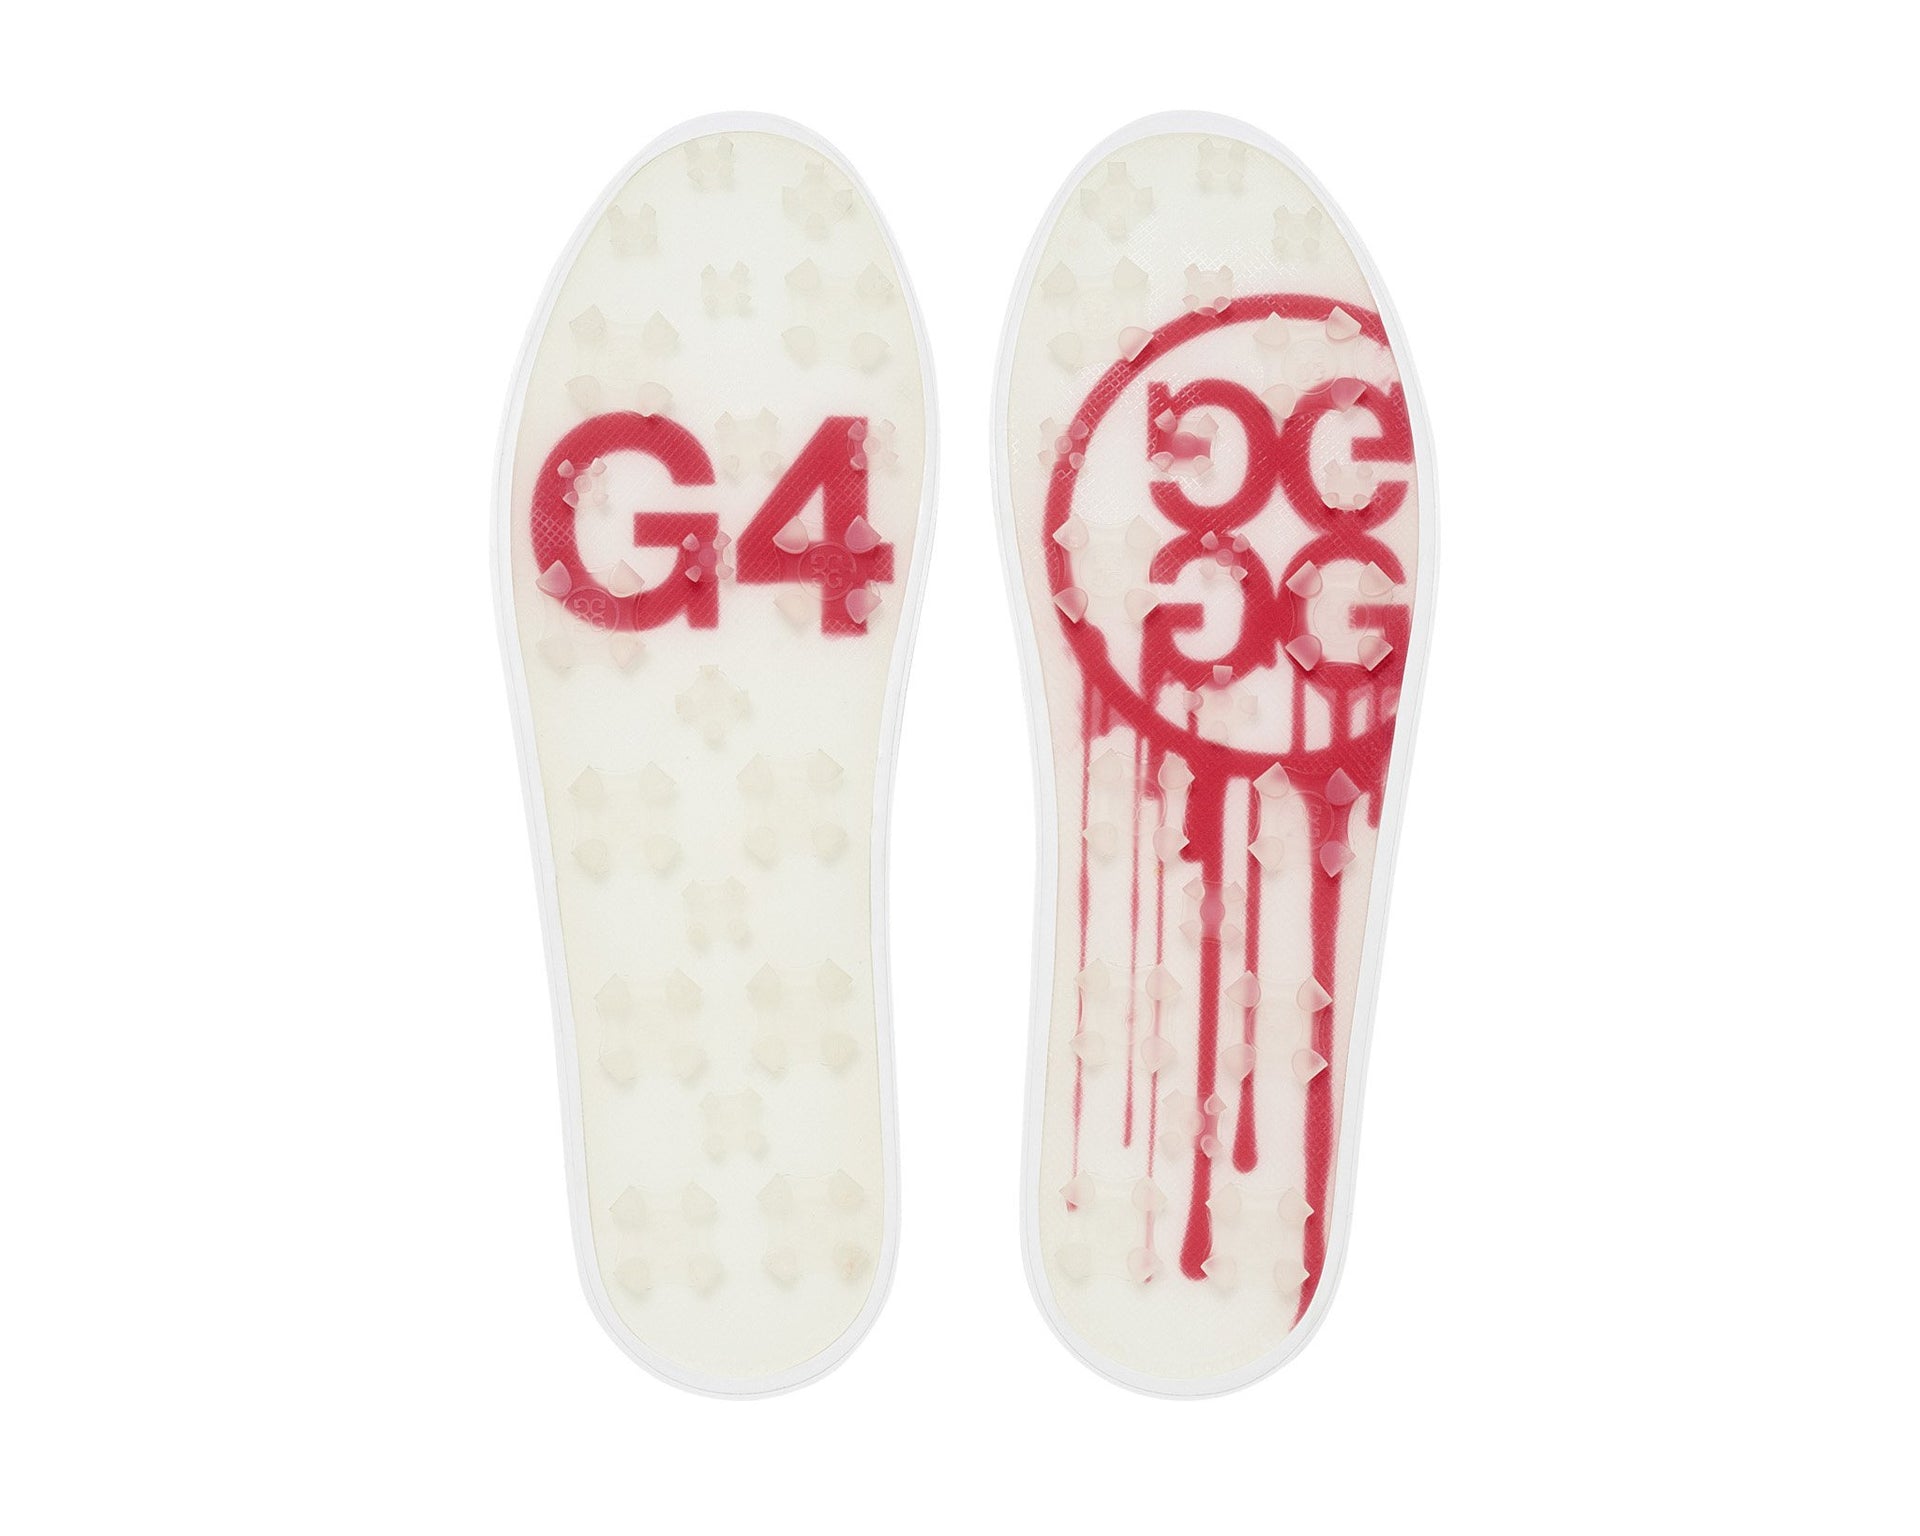 gfore skull shoes